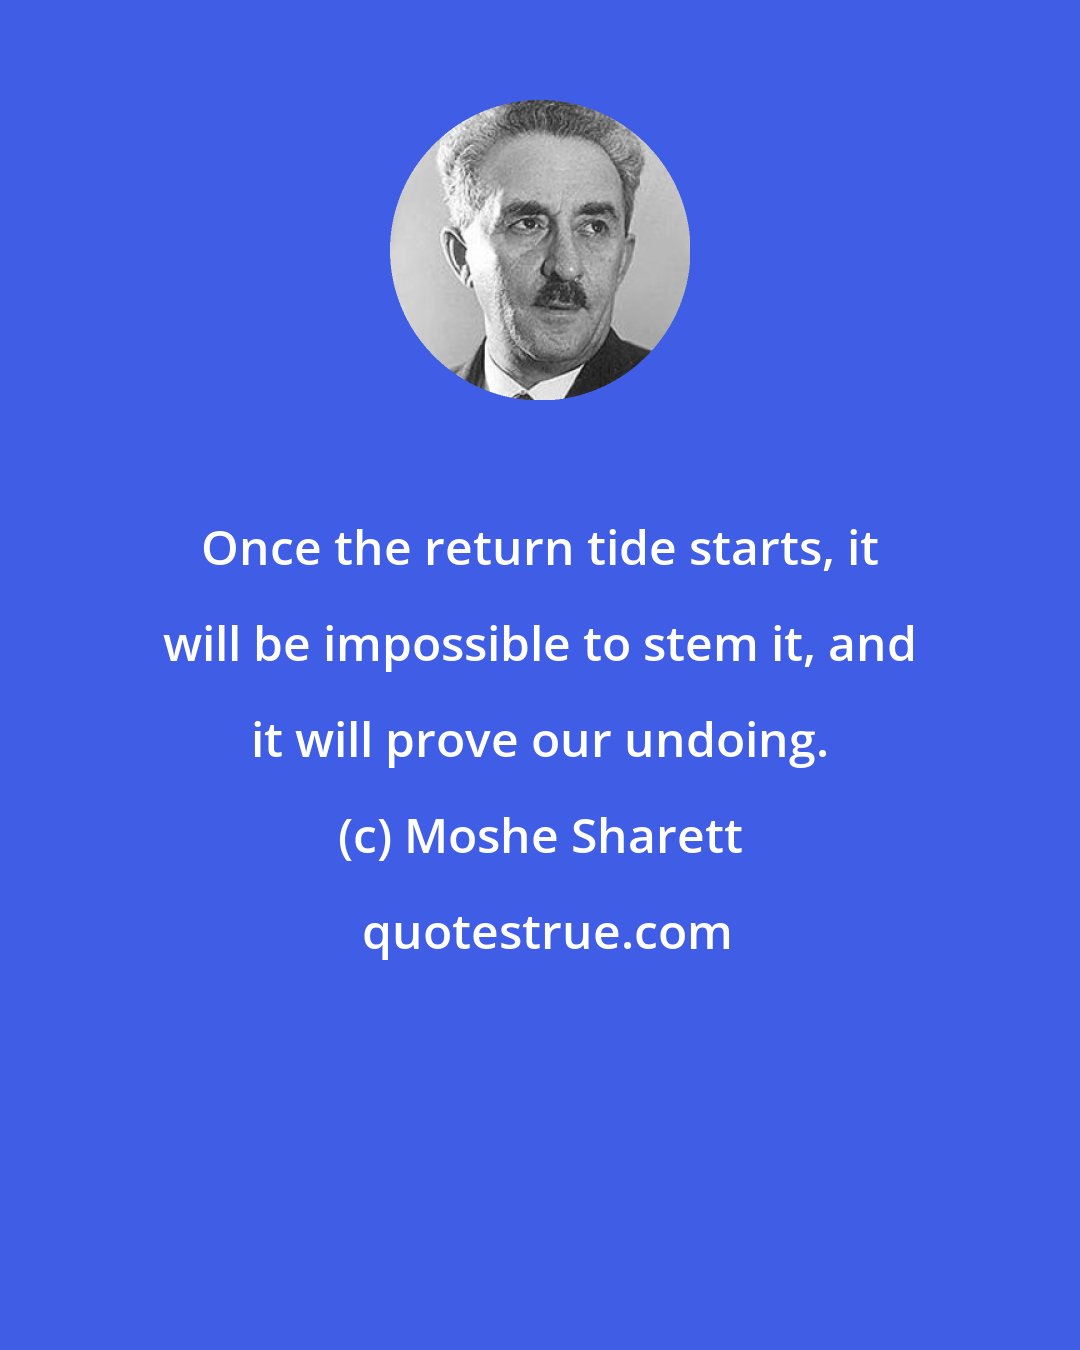 Moshe Sharett: Once the return tide starts, it will be impossible to stem it, and it will prove our undoing.